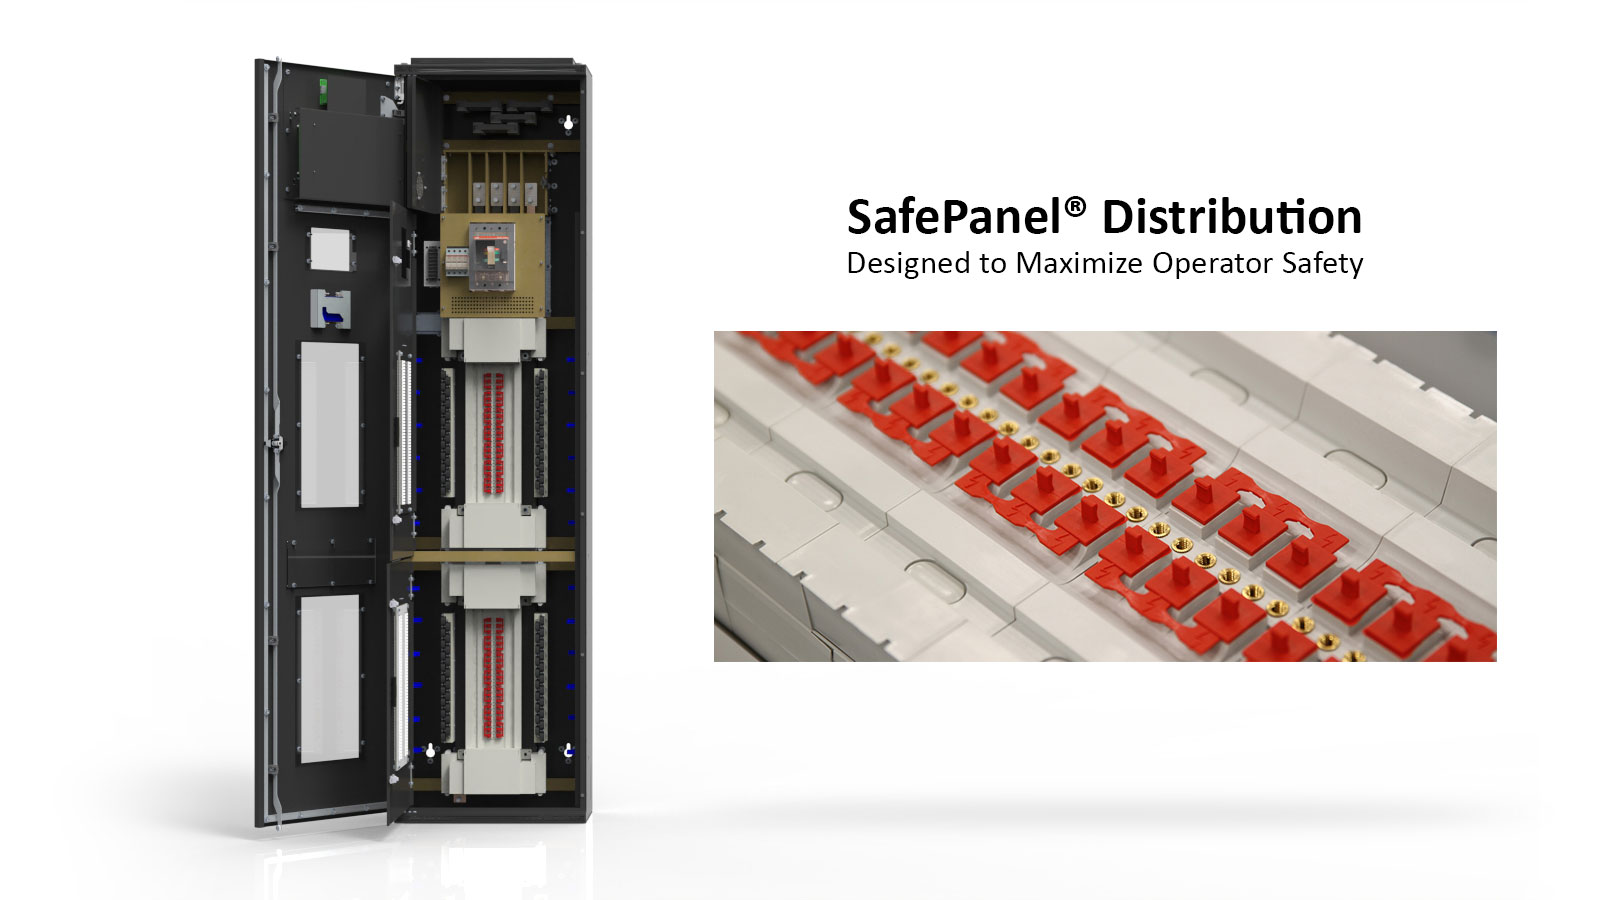 The SafePanel installed in an eRPP